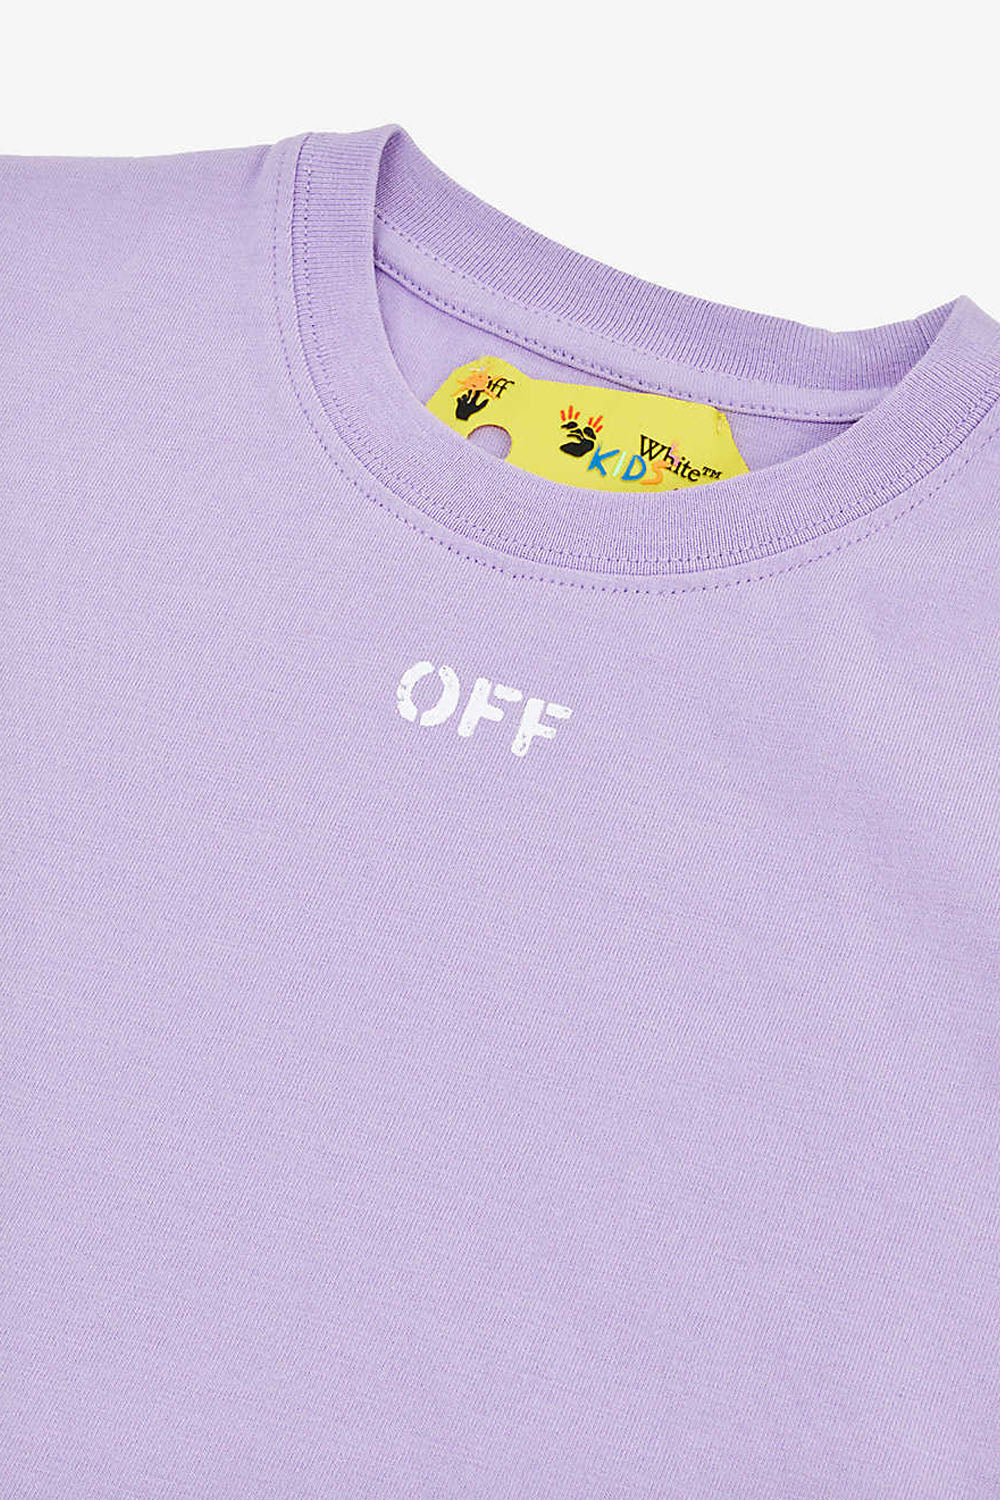 Off Stamp T-Shirt S/S for Girls - Maison7